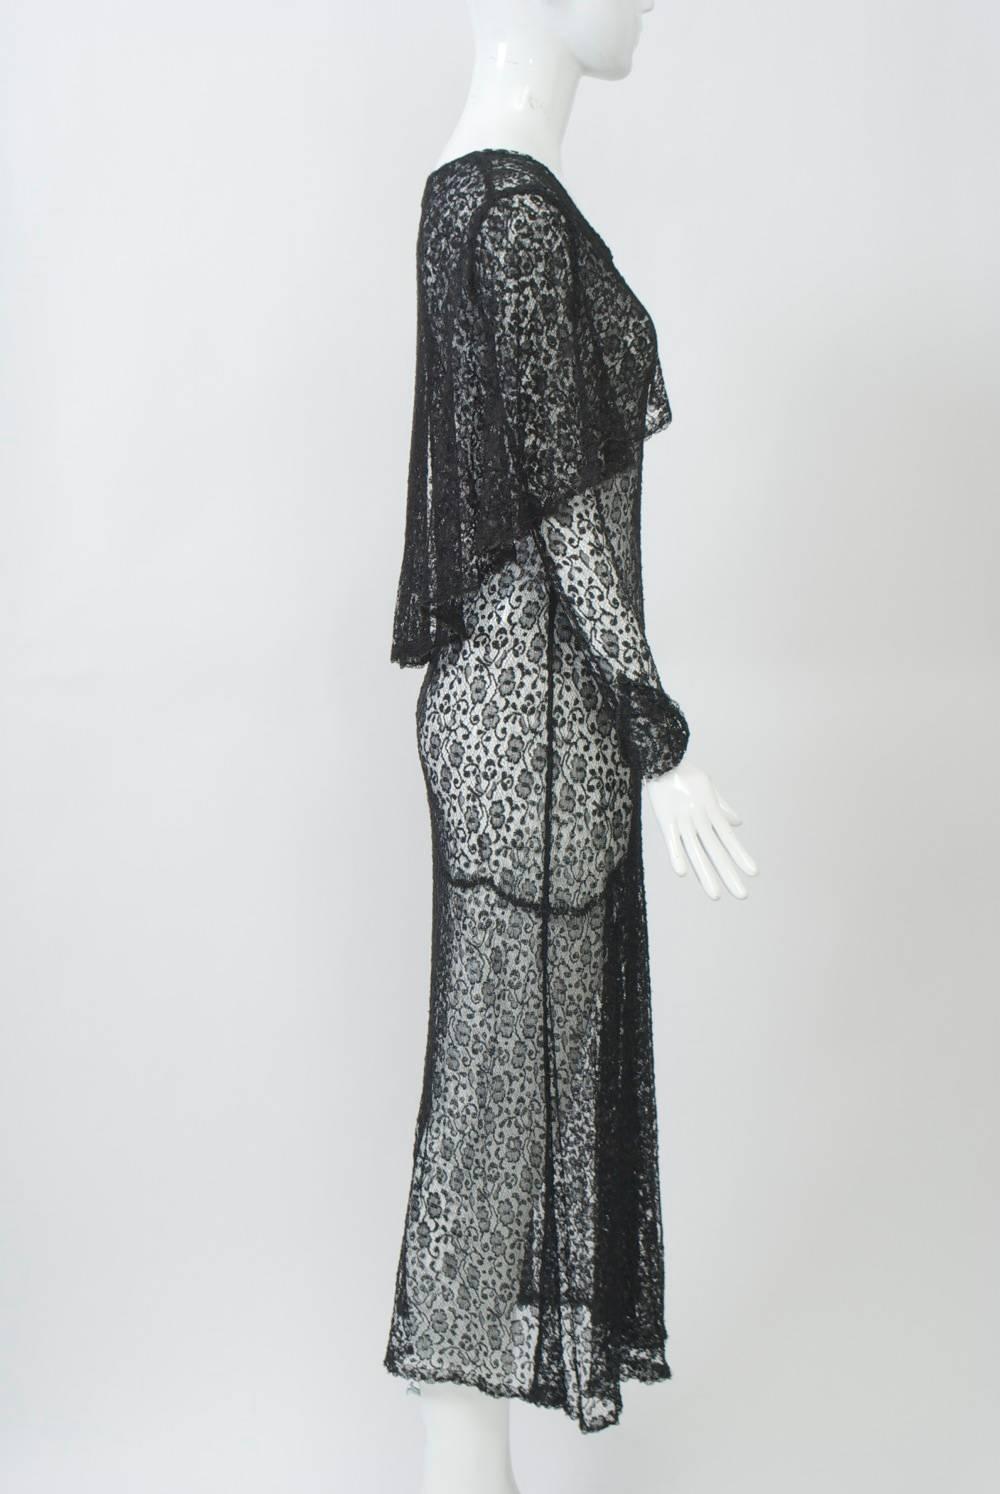 Sheer black lace dress from the 1930s with a fitted bodice through the hips and bias-cut skirt with scalloped seam going from low to high, where it is accented with a gathered pleat. Other features include a sailor-type curved collar that follows